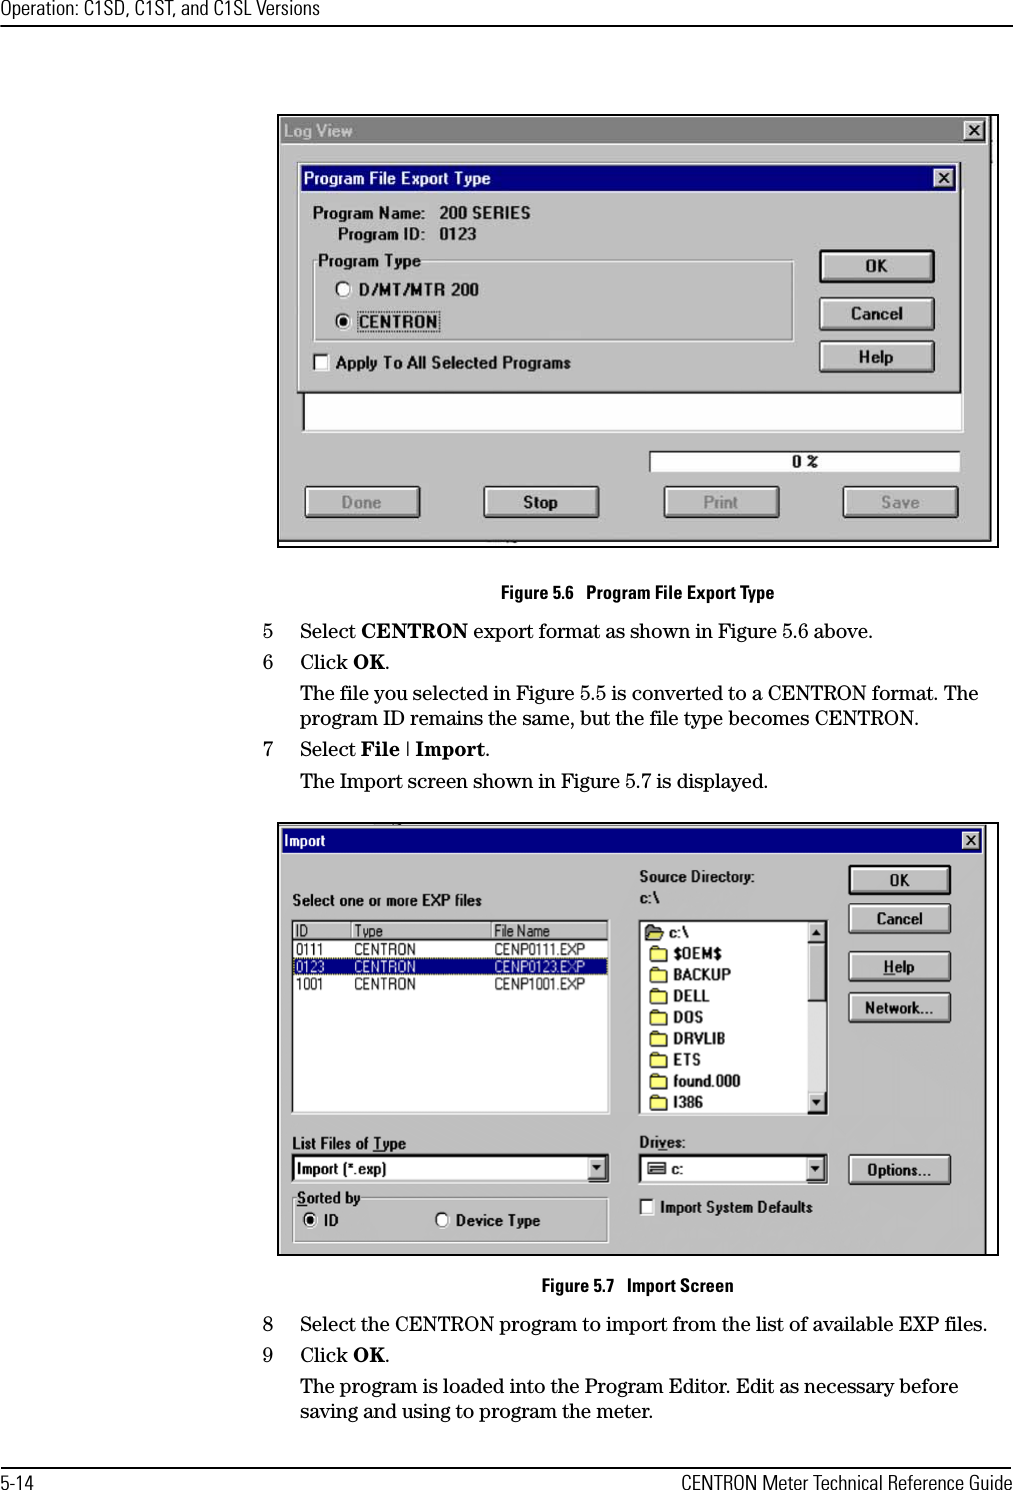 Operation: C1SD, C1ST, and C1SL Versions5-14 CENTRON Meter Technical Reference GuideFigure 5.6   Program File Export Type5Select CENTRON export format as shown in Figure 5.6 above.6Click OK.The file you selected in Figure 5.5 is converted to a CENTRON format. The program ID remains the same, but the file type becomes CENTRON.7Select File | Import.The Import screen shown in Figure 5.7 is displayed.Figure 5.7   Import Screen8 Select the CENTRON program to import from the list of available EXP files.9Click OK.The program is loaded into the Program Editor. Edit as necessary before saving and using to program the meter.